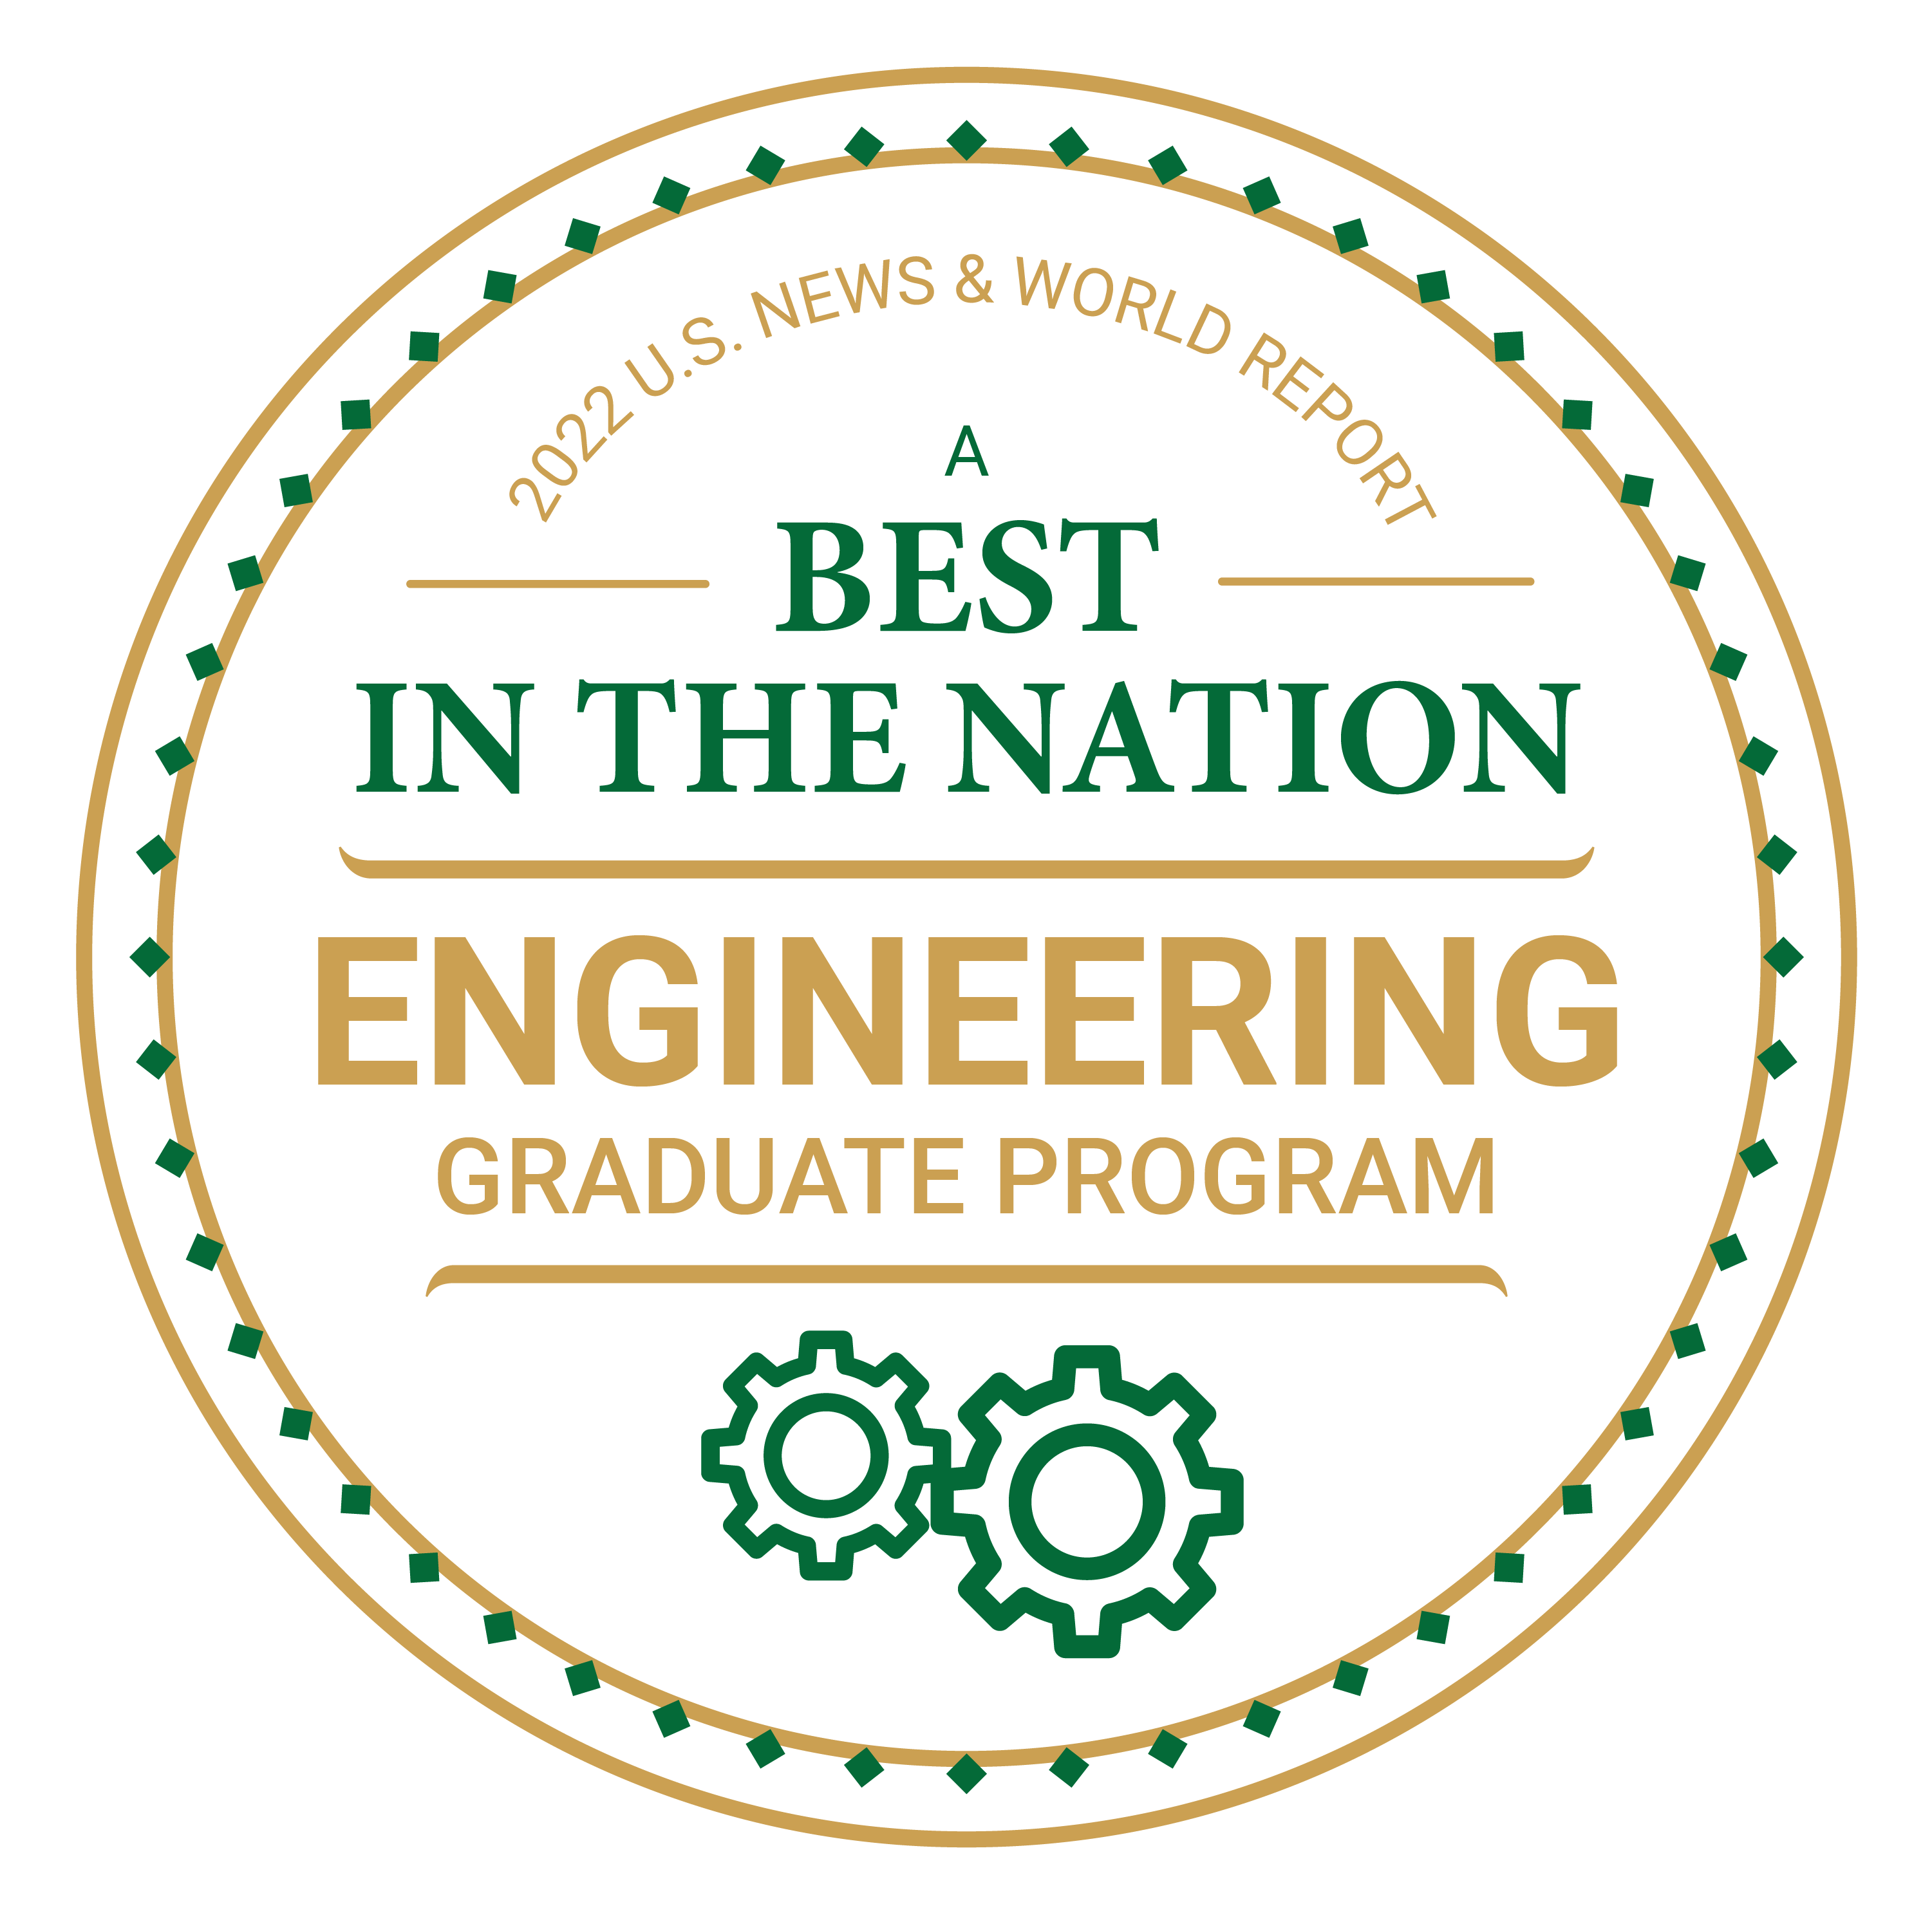 2022 U.S. News & World Report A Best in the Nation Engineering Graduate Program